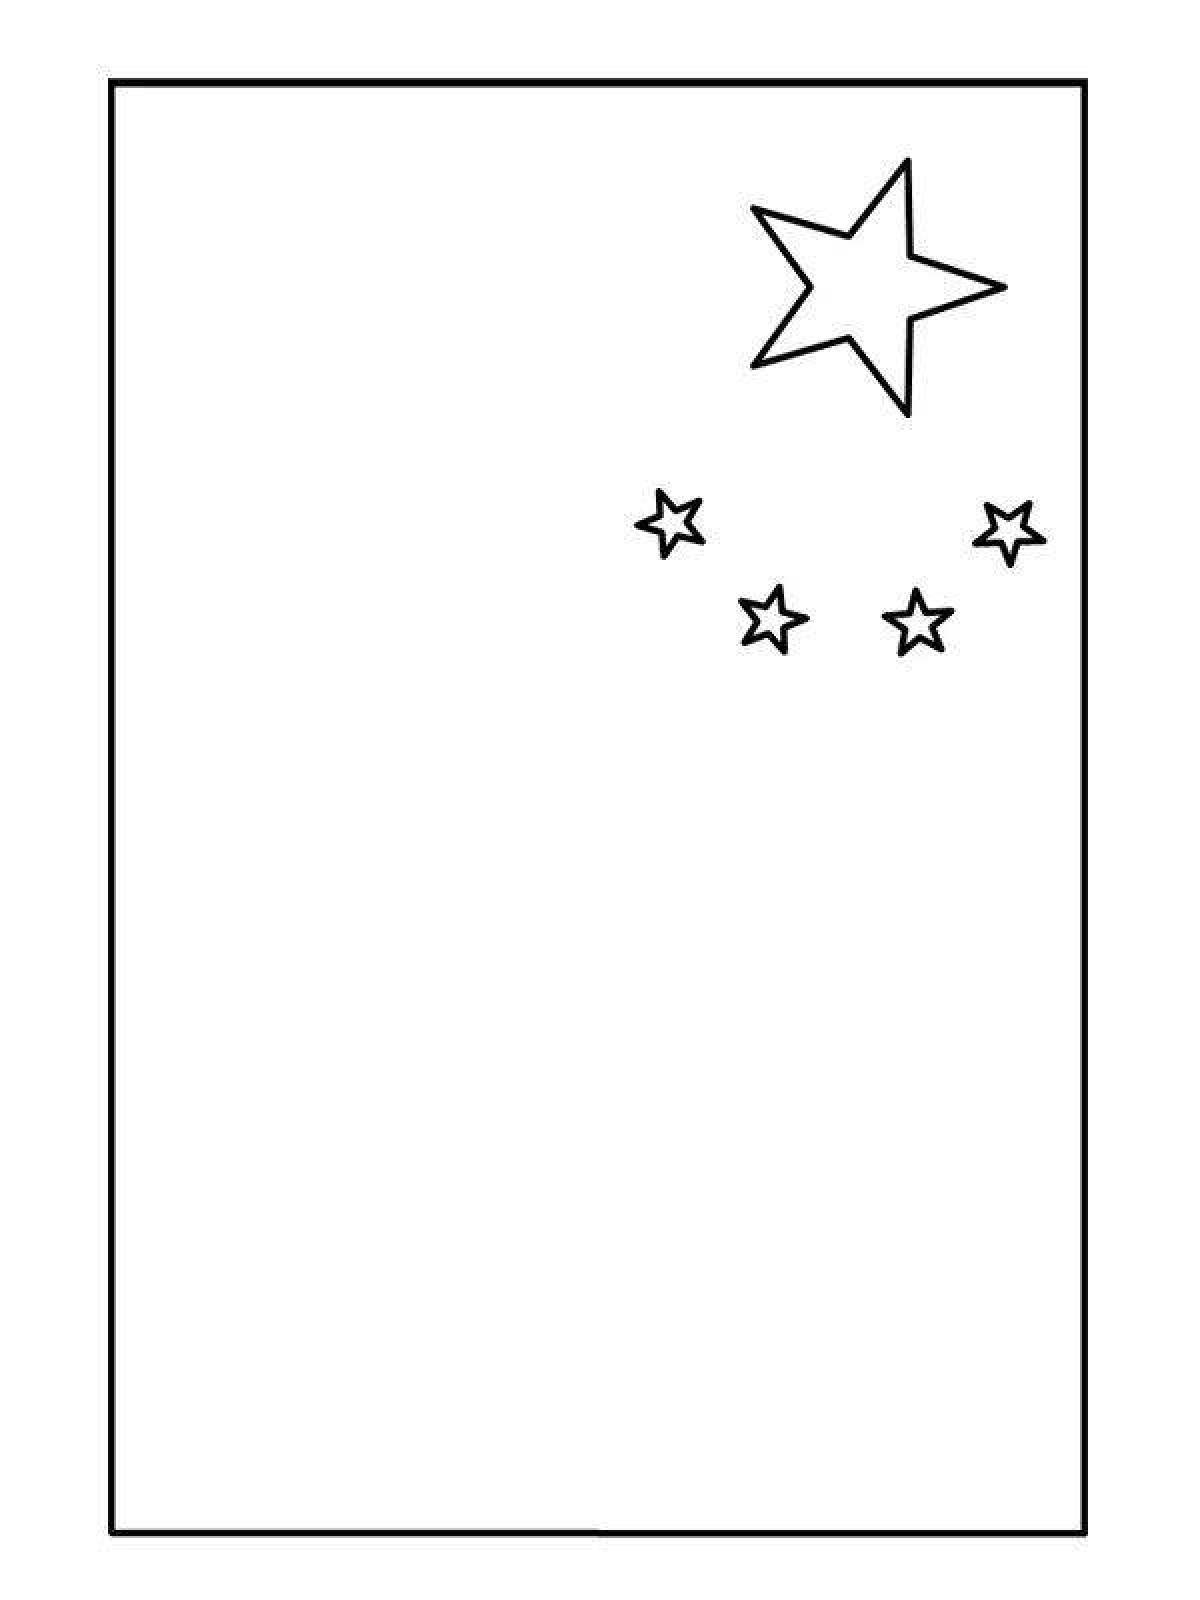 Chinese flag shining coloring page